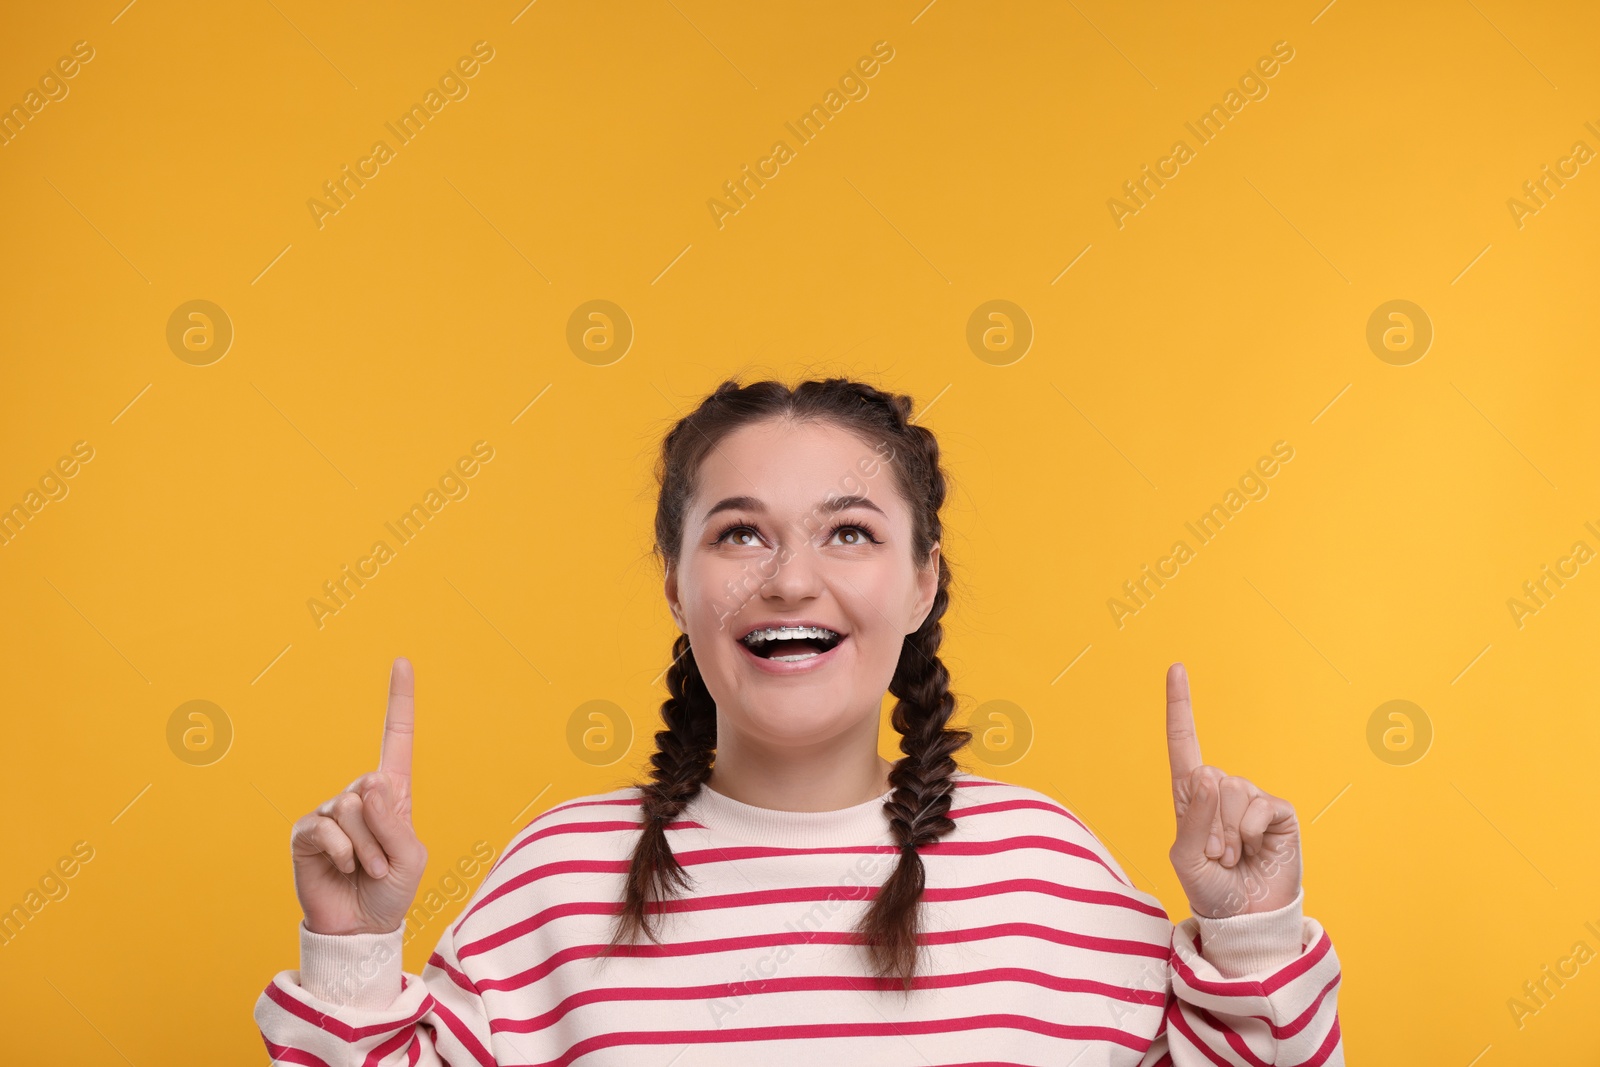 Photo of Happy woman with braces pointing at something on orange background. Space for text